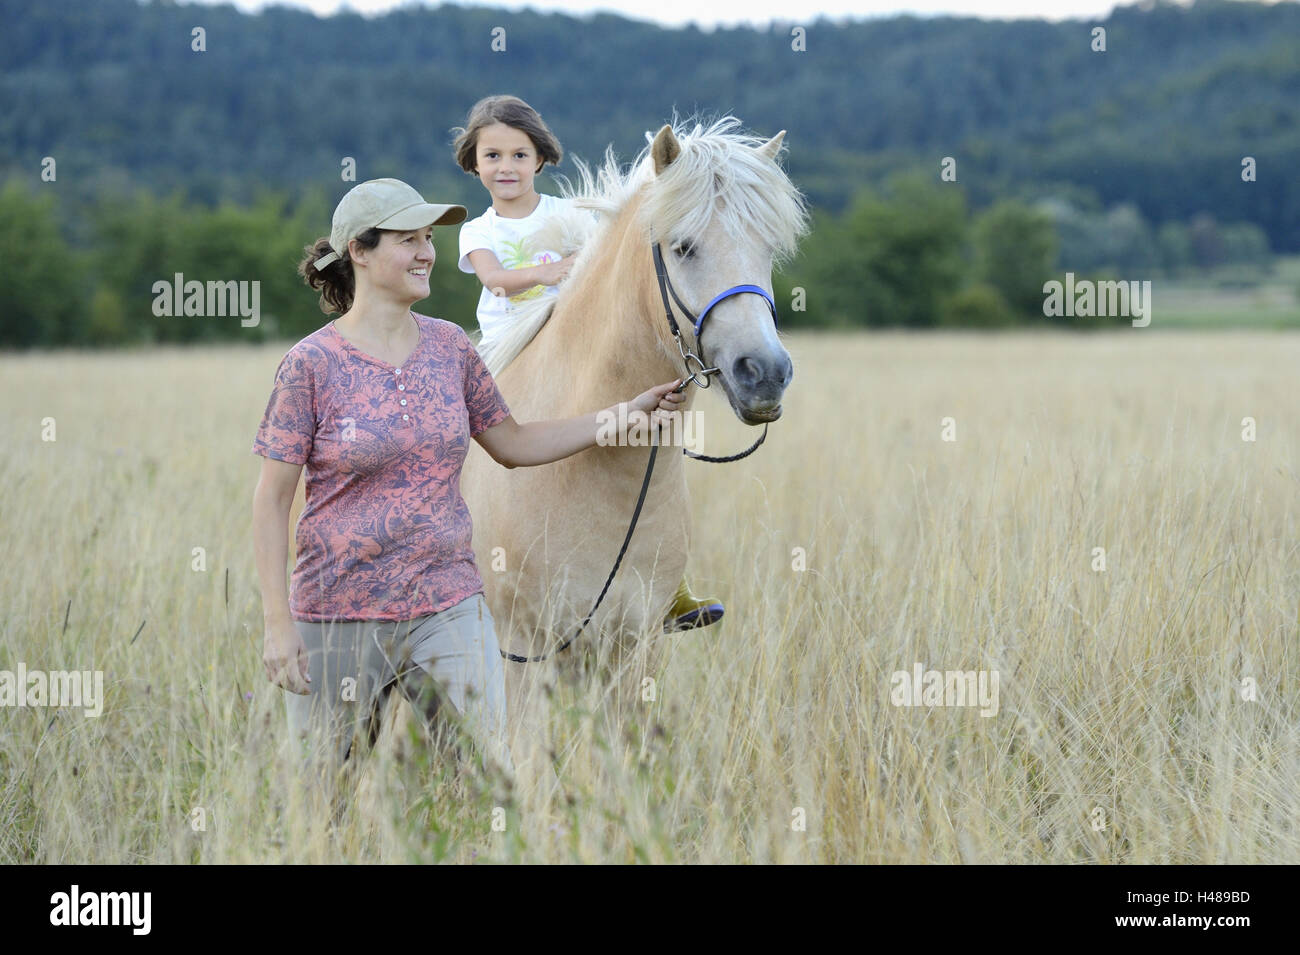 Rider, girl, horse, meadow, leading, looking at camera, landscape, Stock Photo